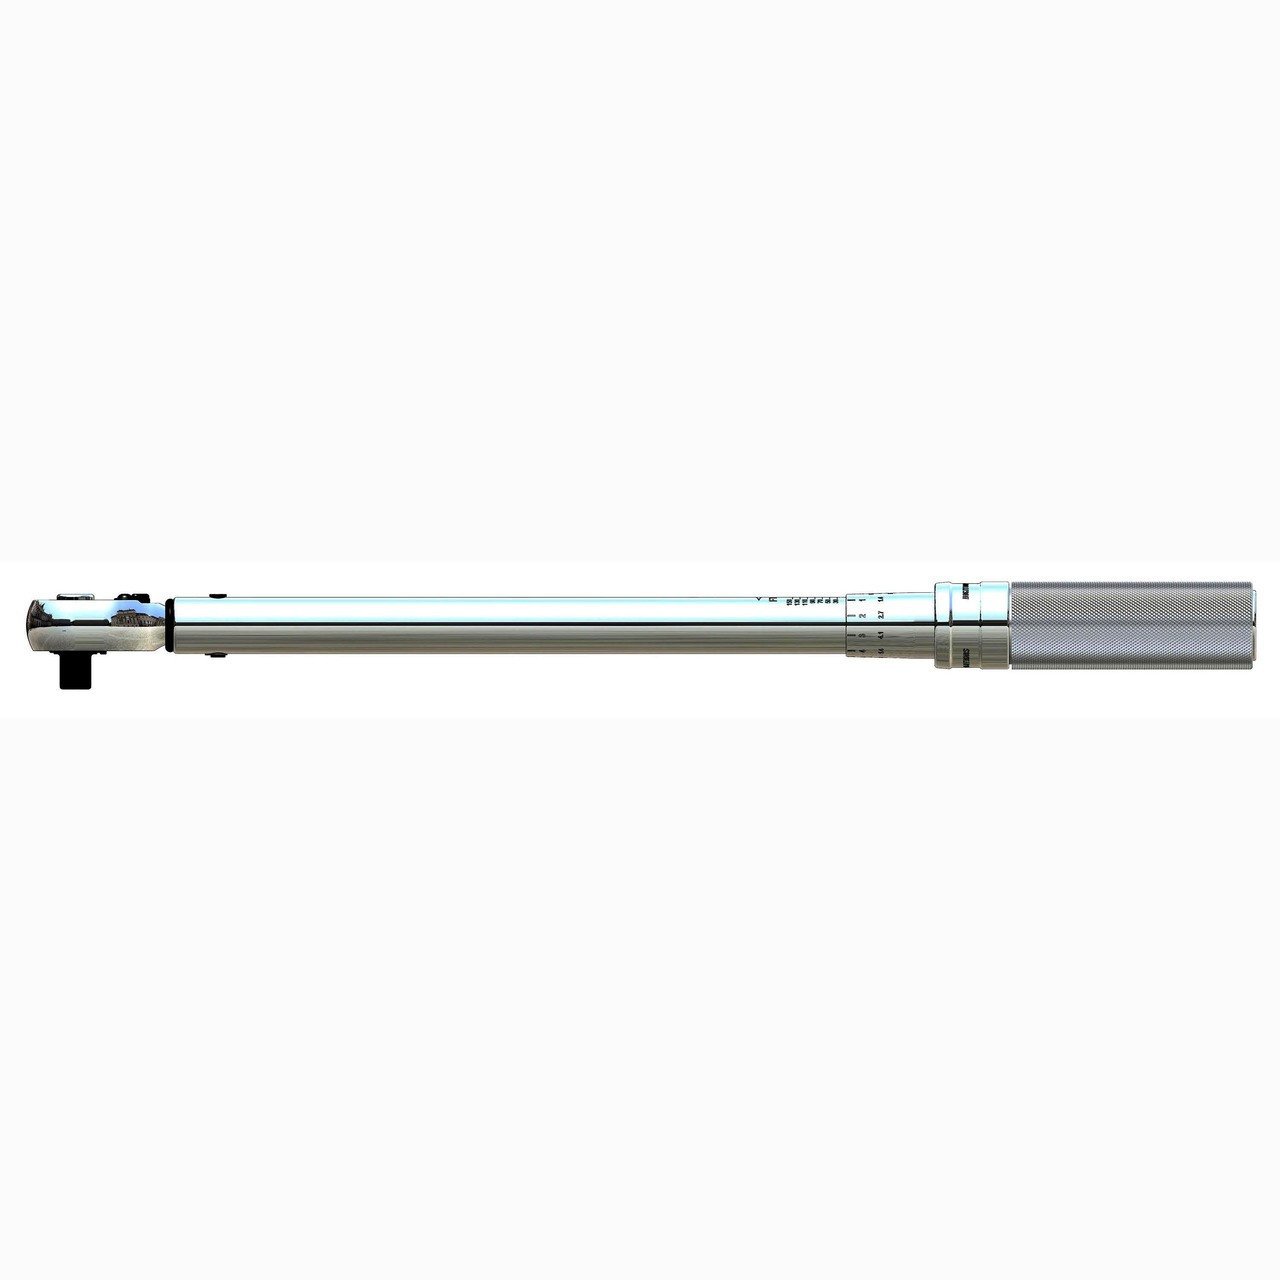 3/8" Dr 100-1000 In Lbs / 11.3-113 Nm Digitool Adj Torque Wrench - C-10001-2